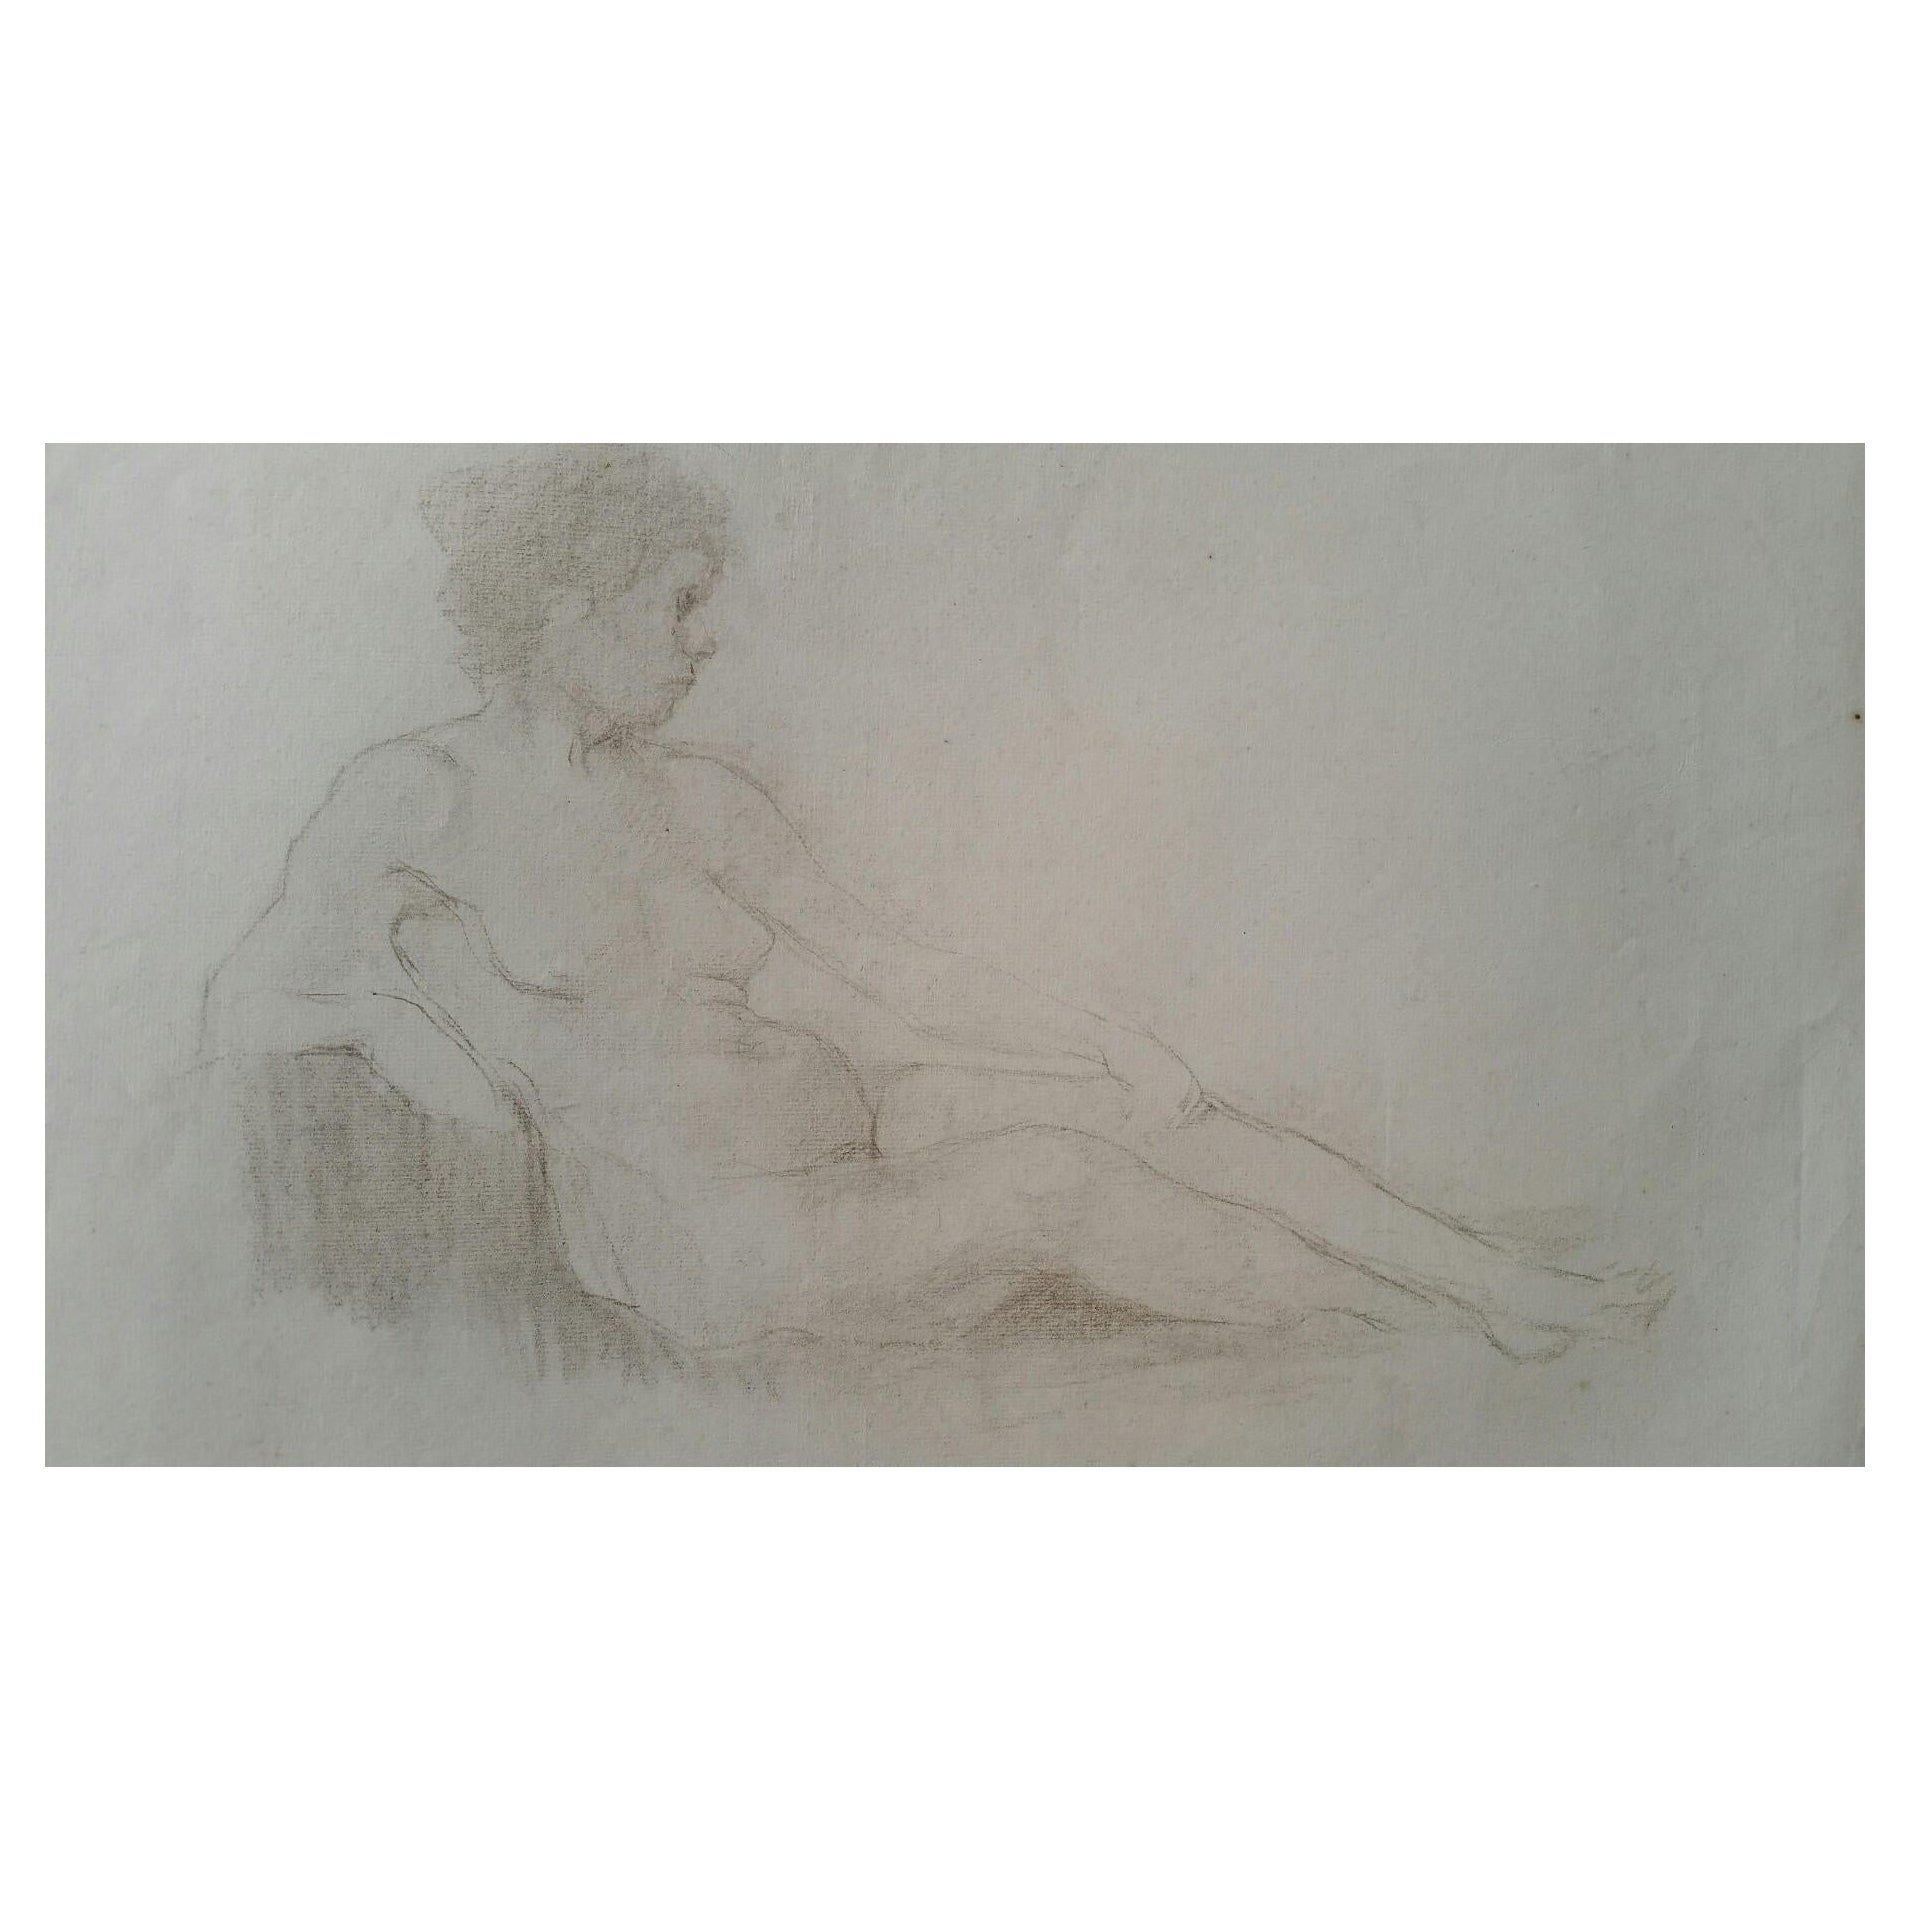 English Antique Portrait Sketch of Reclining Female Nude 'Double Sided'